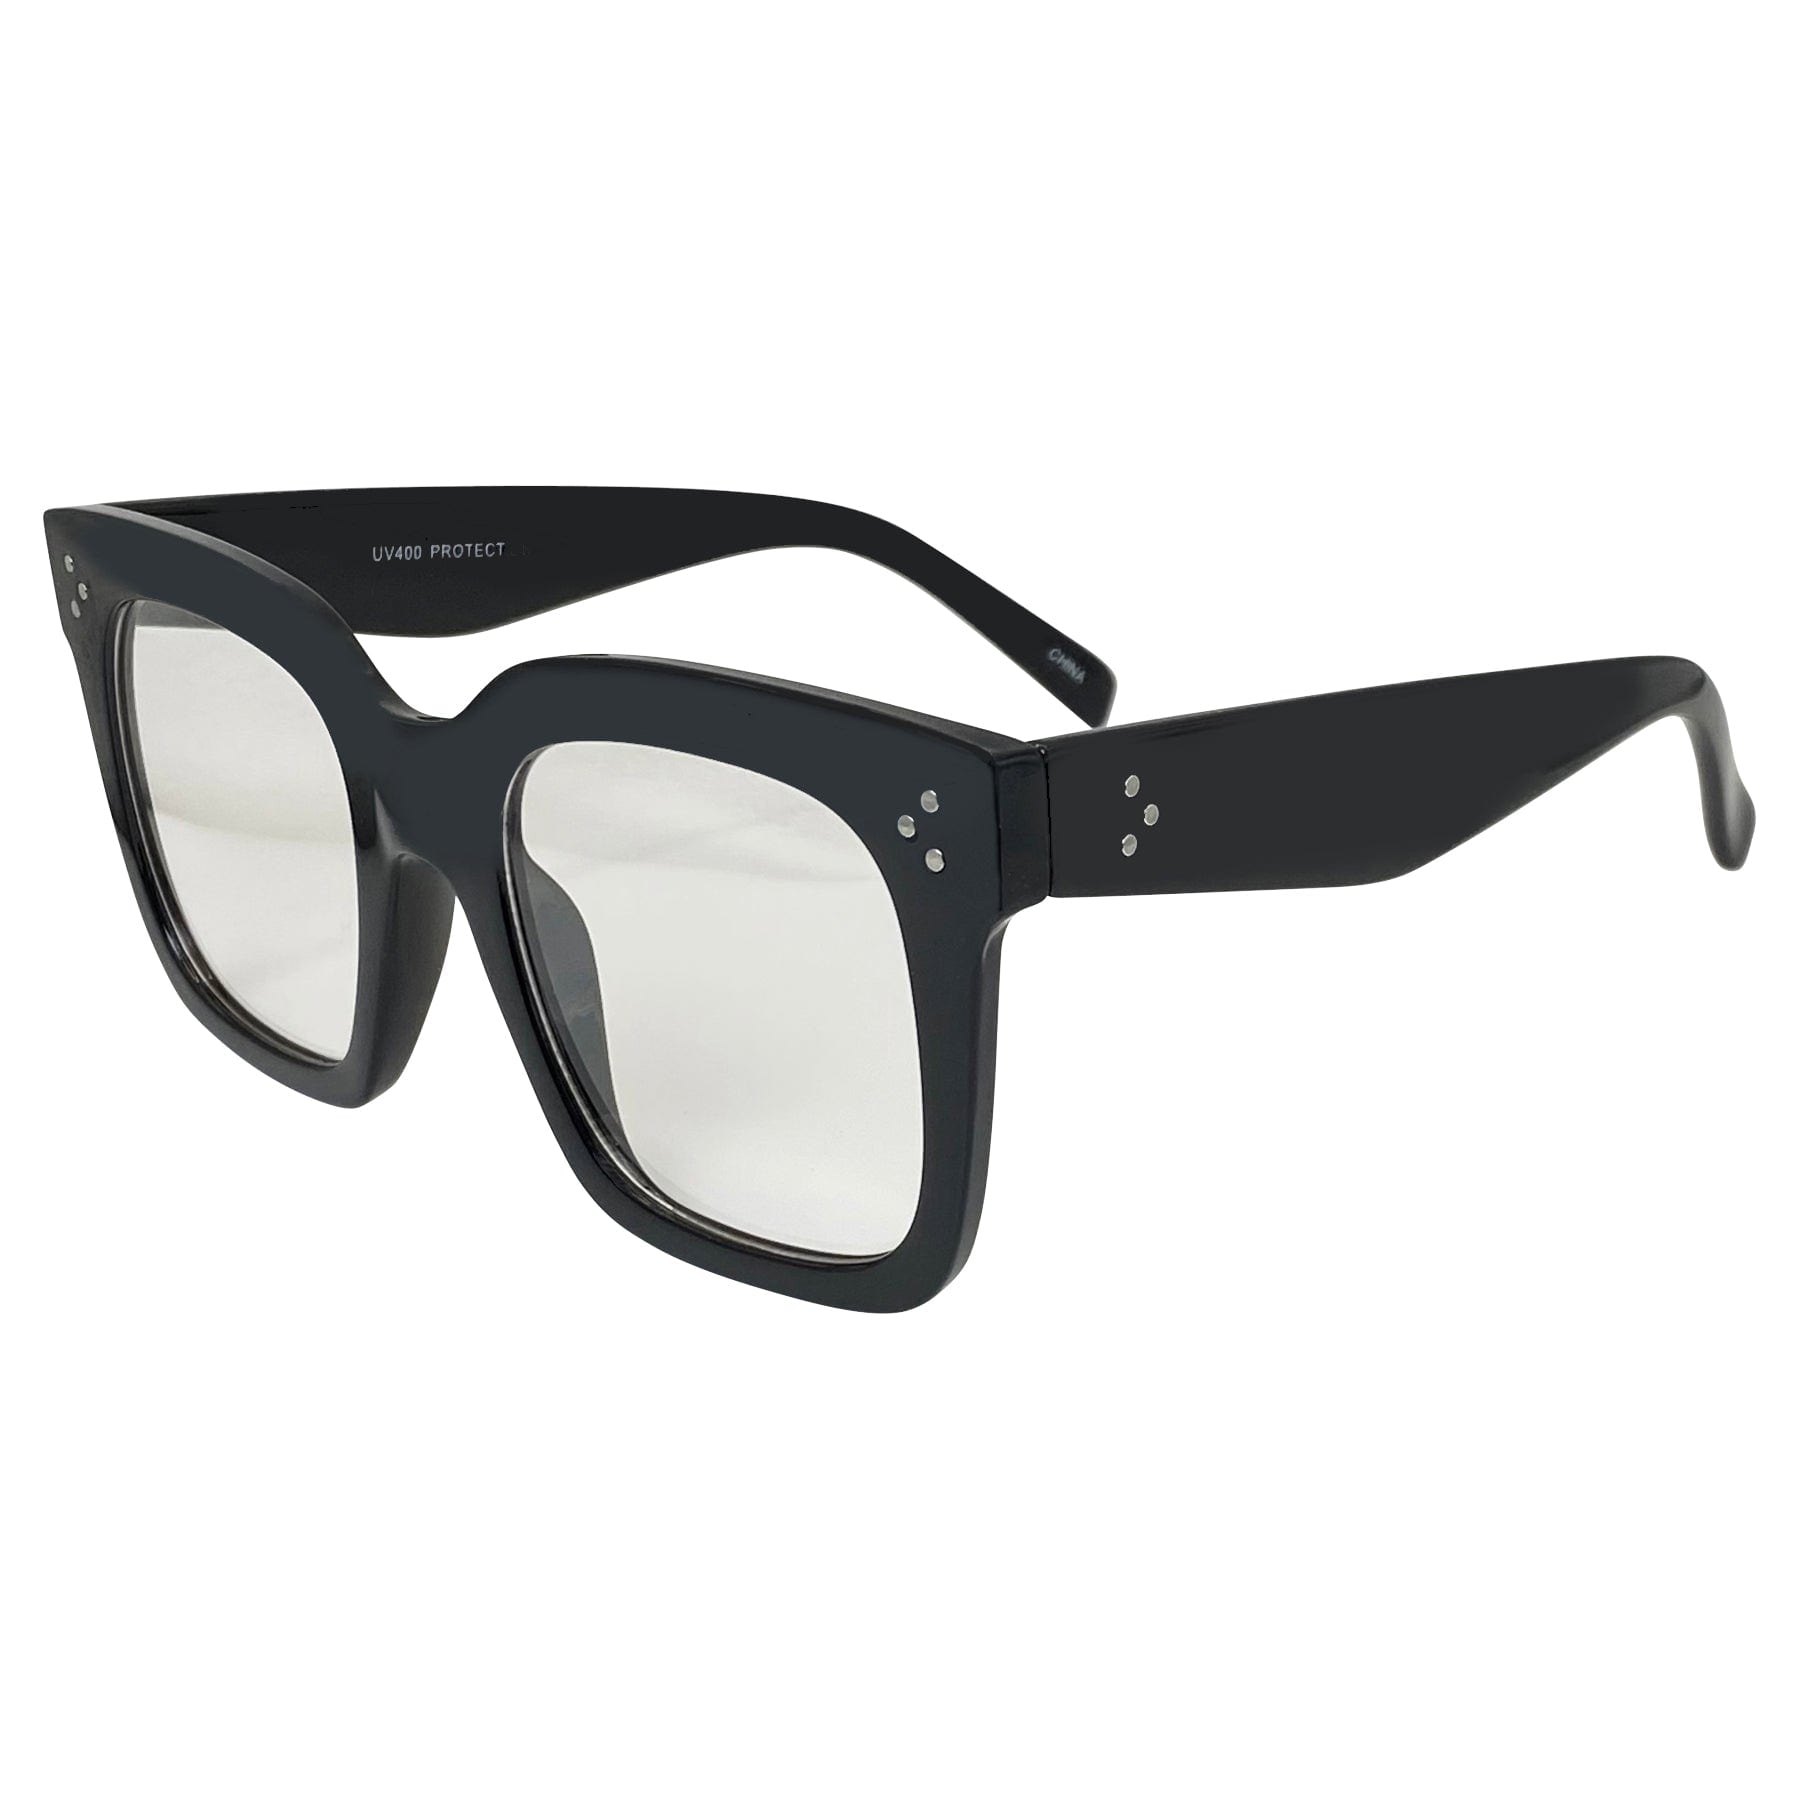 clear big glasses with a square frame and matte black finish 